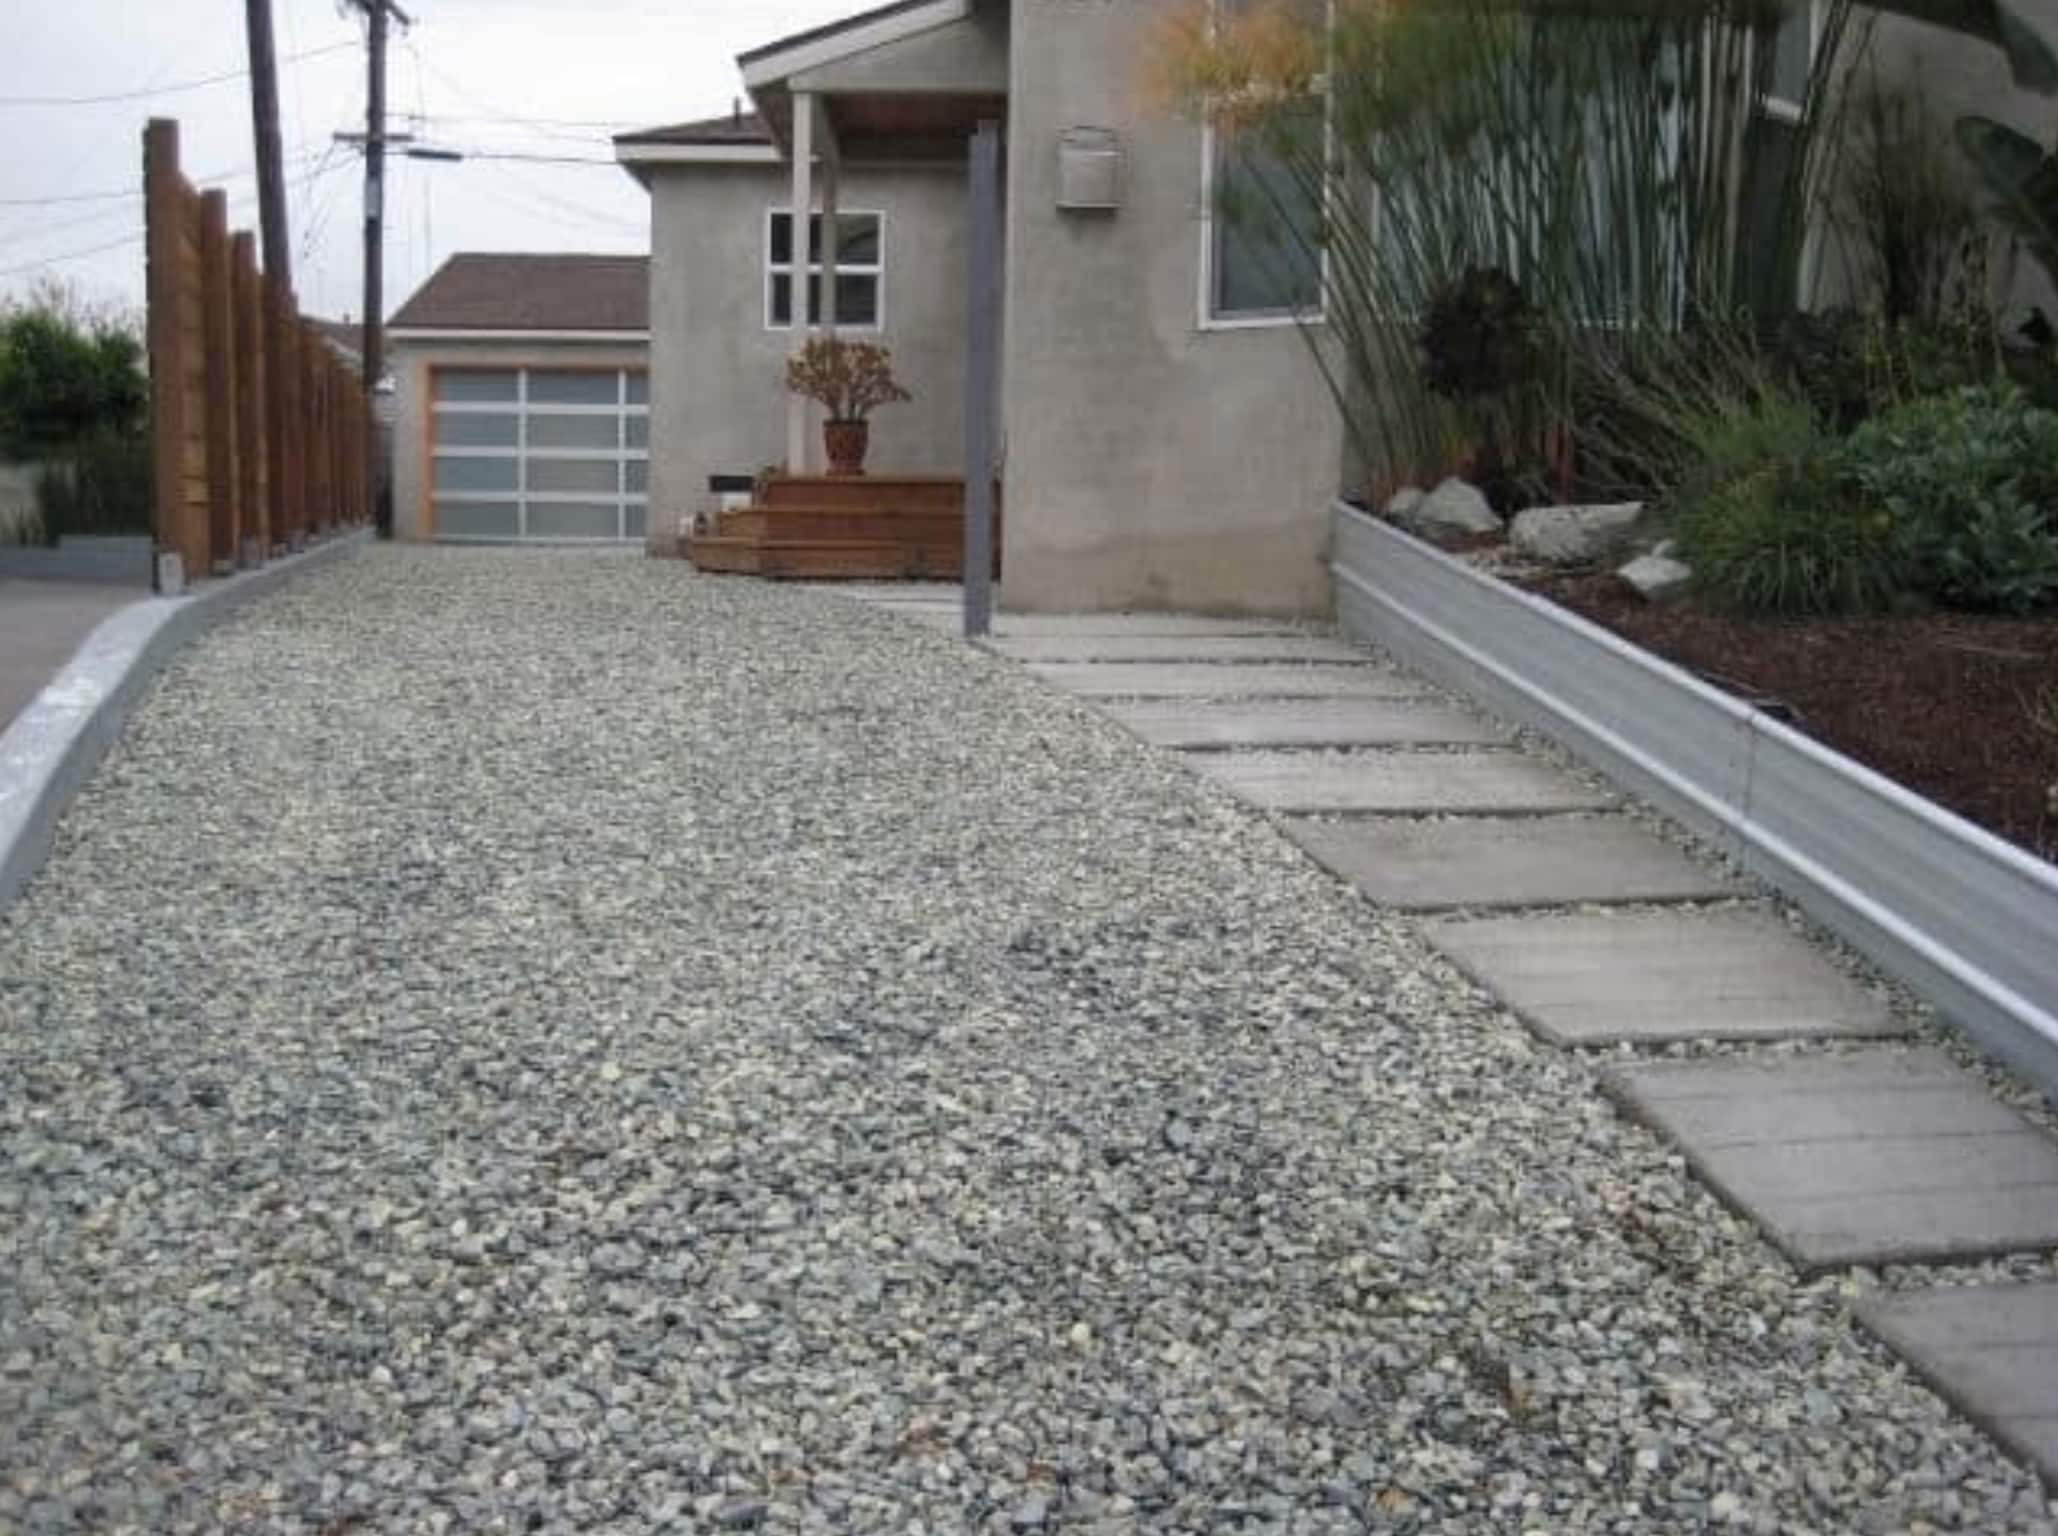 How To Permanently Get Rid Of Weeds In Gravel Driveway